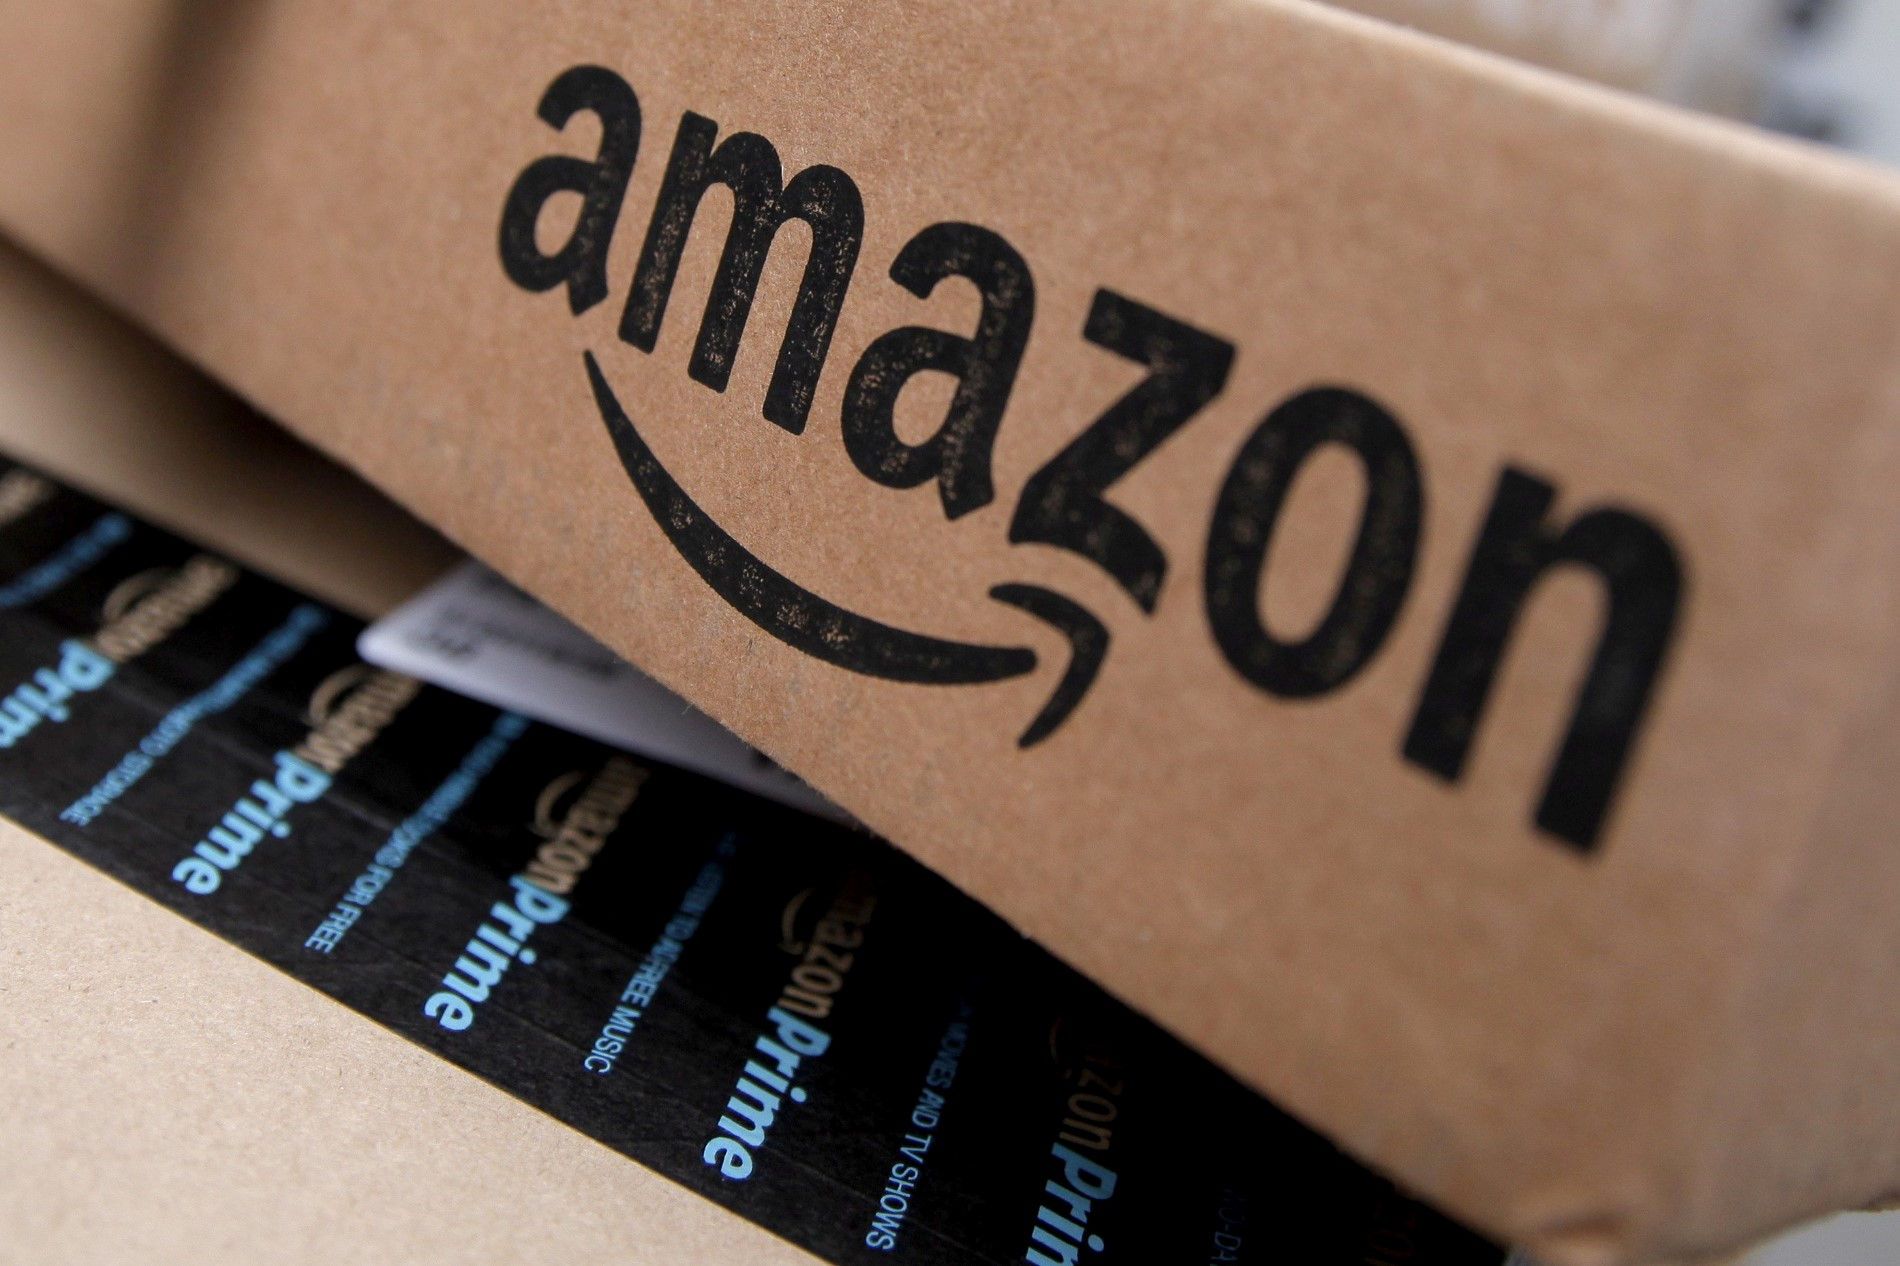 Amazon brings same-day delivery to 3,000 additional cities